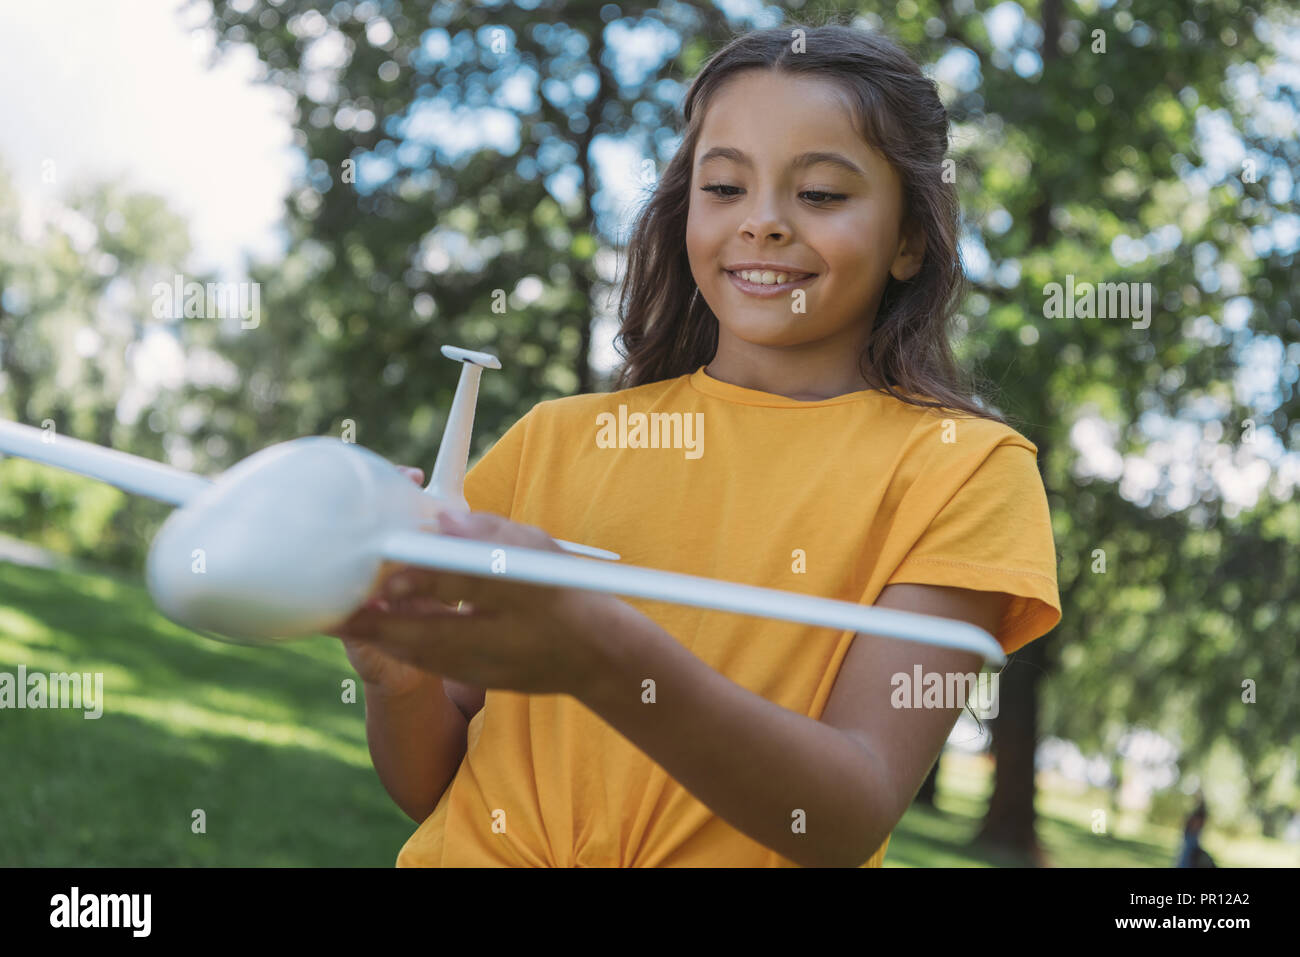 close-up view of cute smiling child holding toy plane model in park Stock Photo